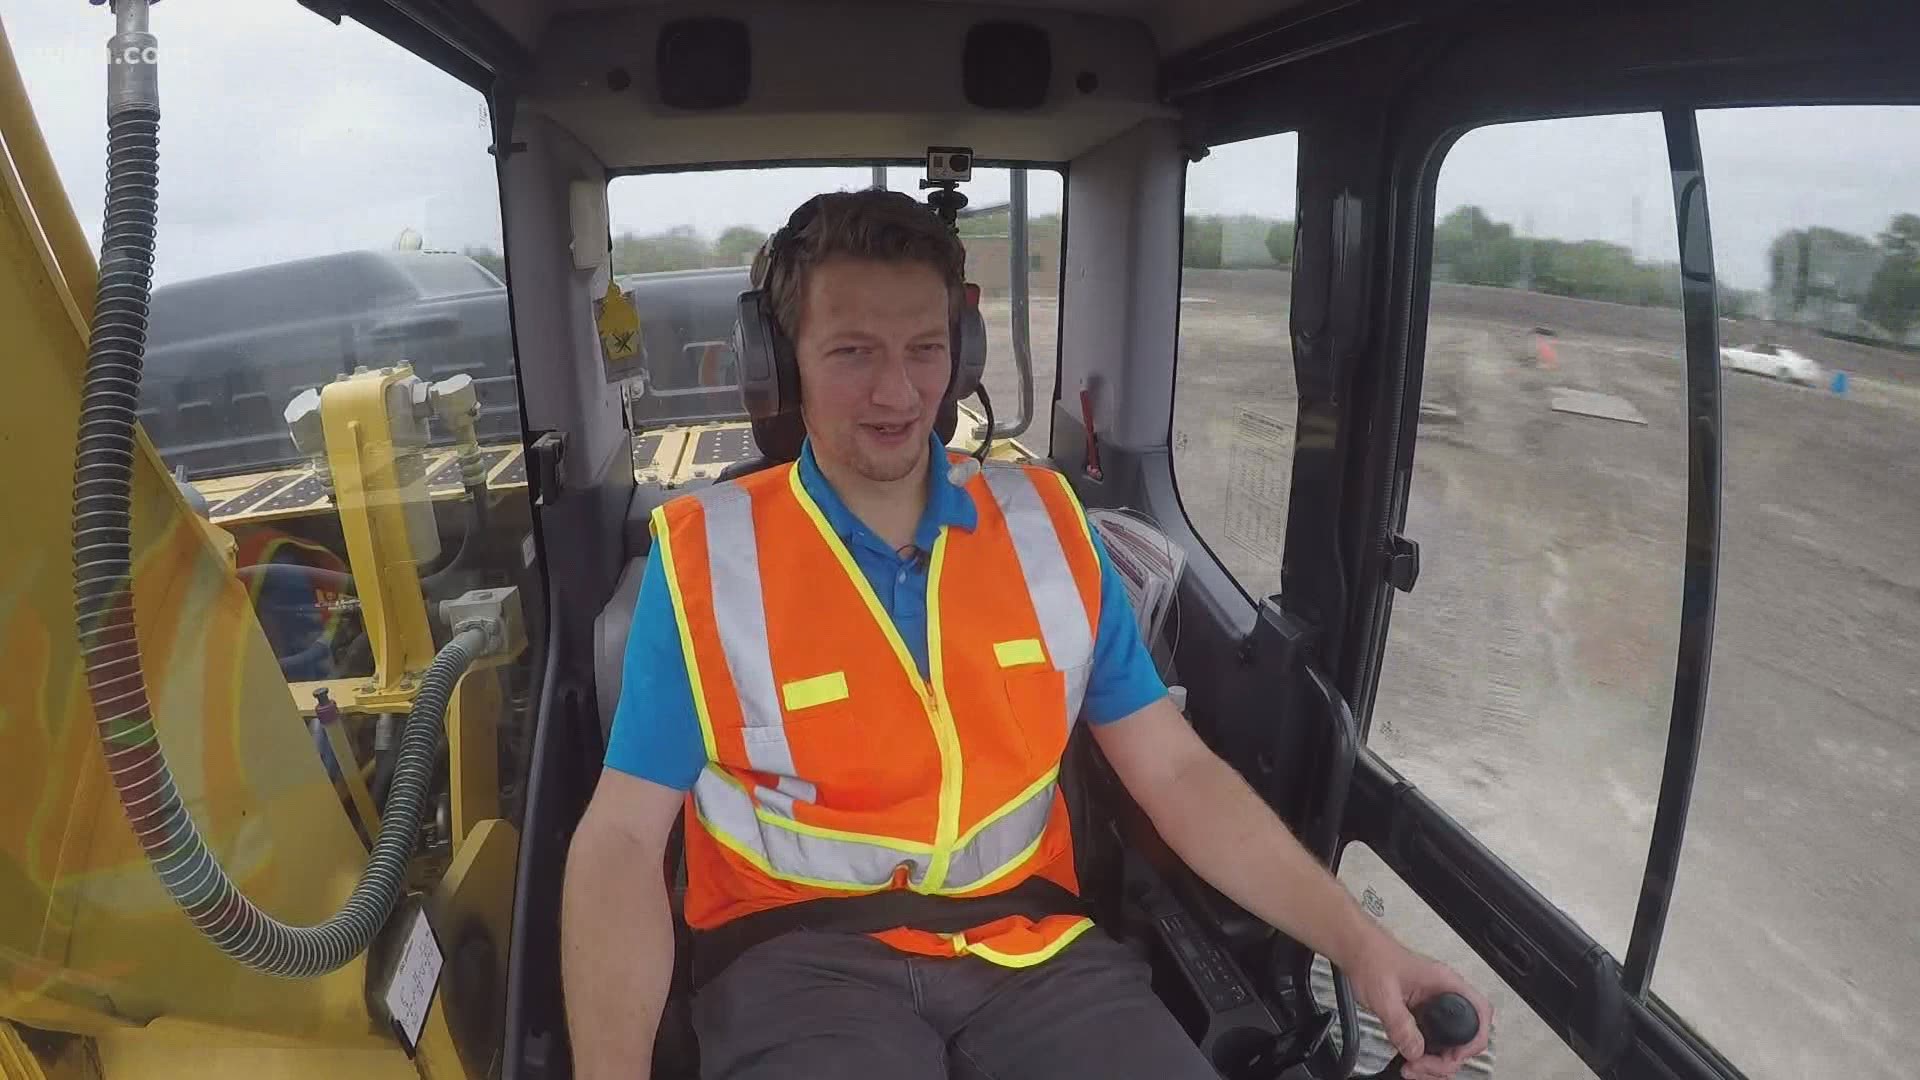 Extreme Sandbox lets customers operate heavy duty construction equipment.